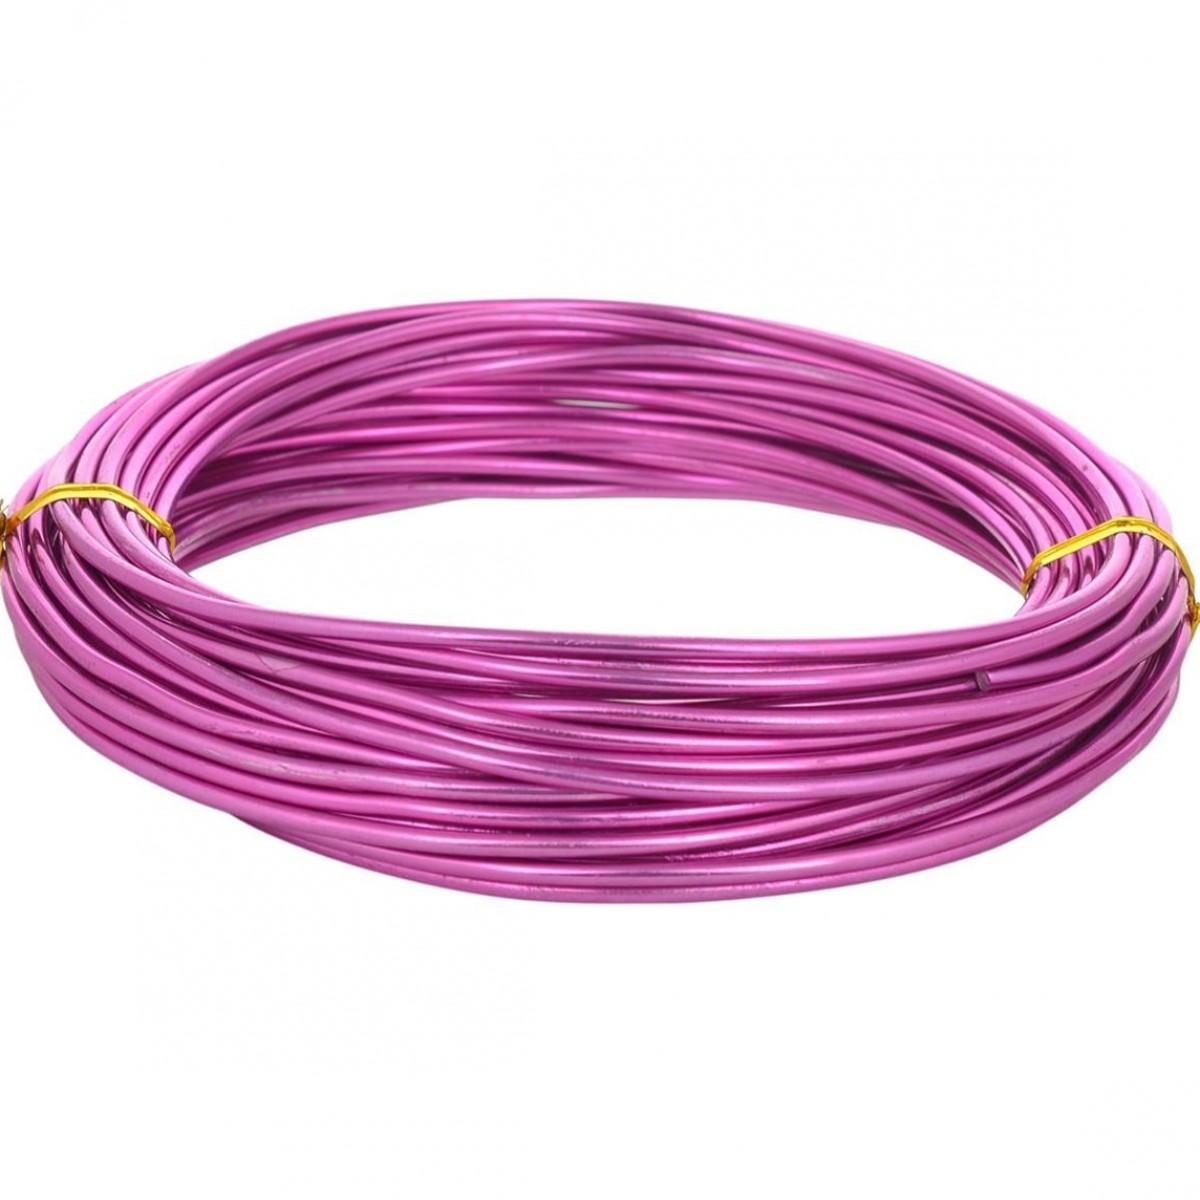 4006 Aluminium Wire Strong Pink 12guagex10yards (5 Nos)